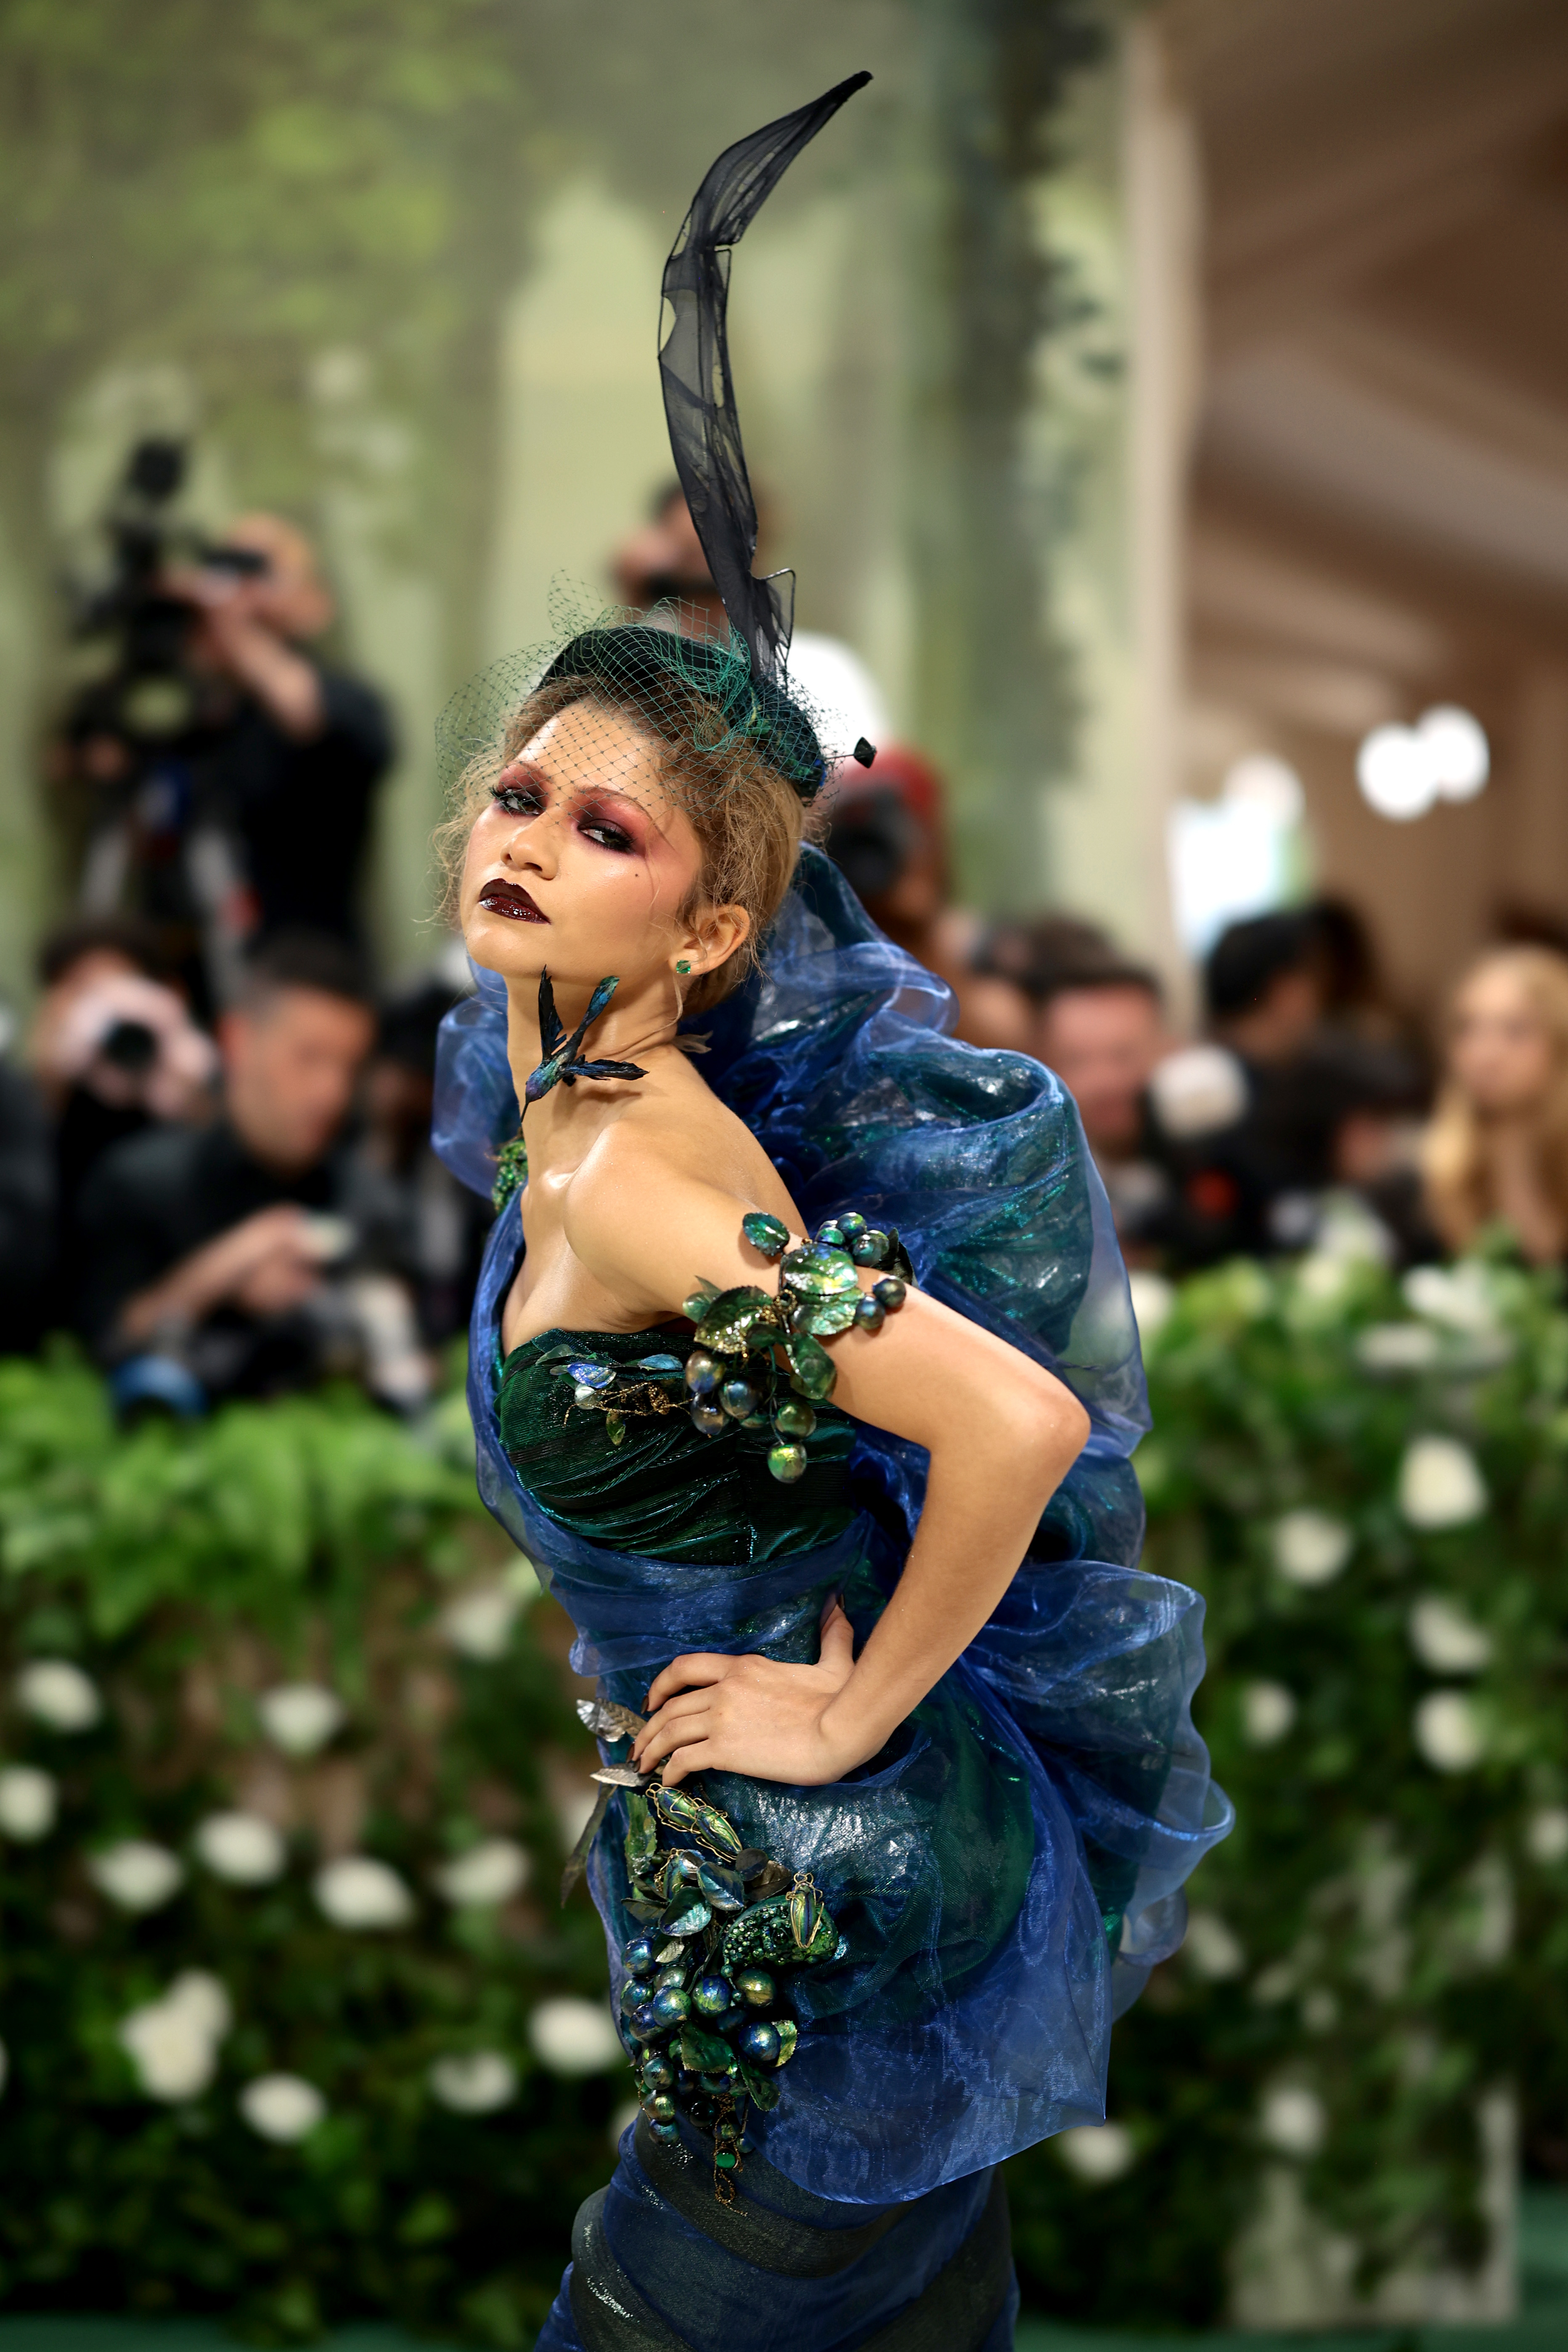 Zendaya in elaborate blue ruffled gown with black feathered headpiece at event